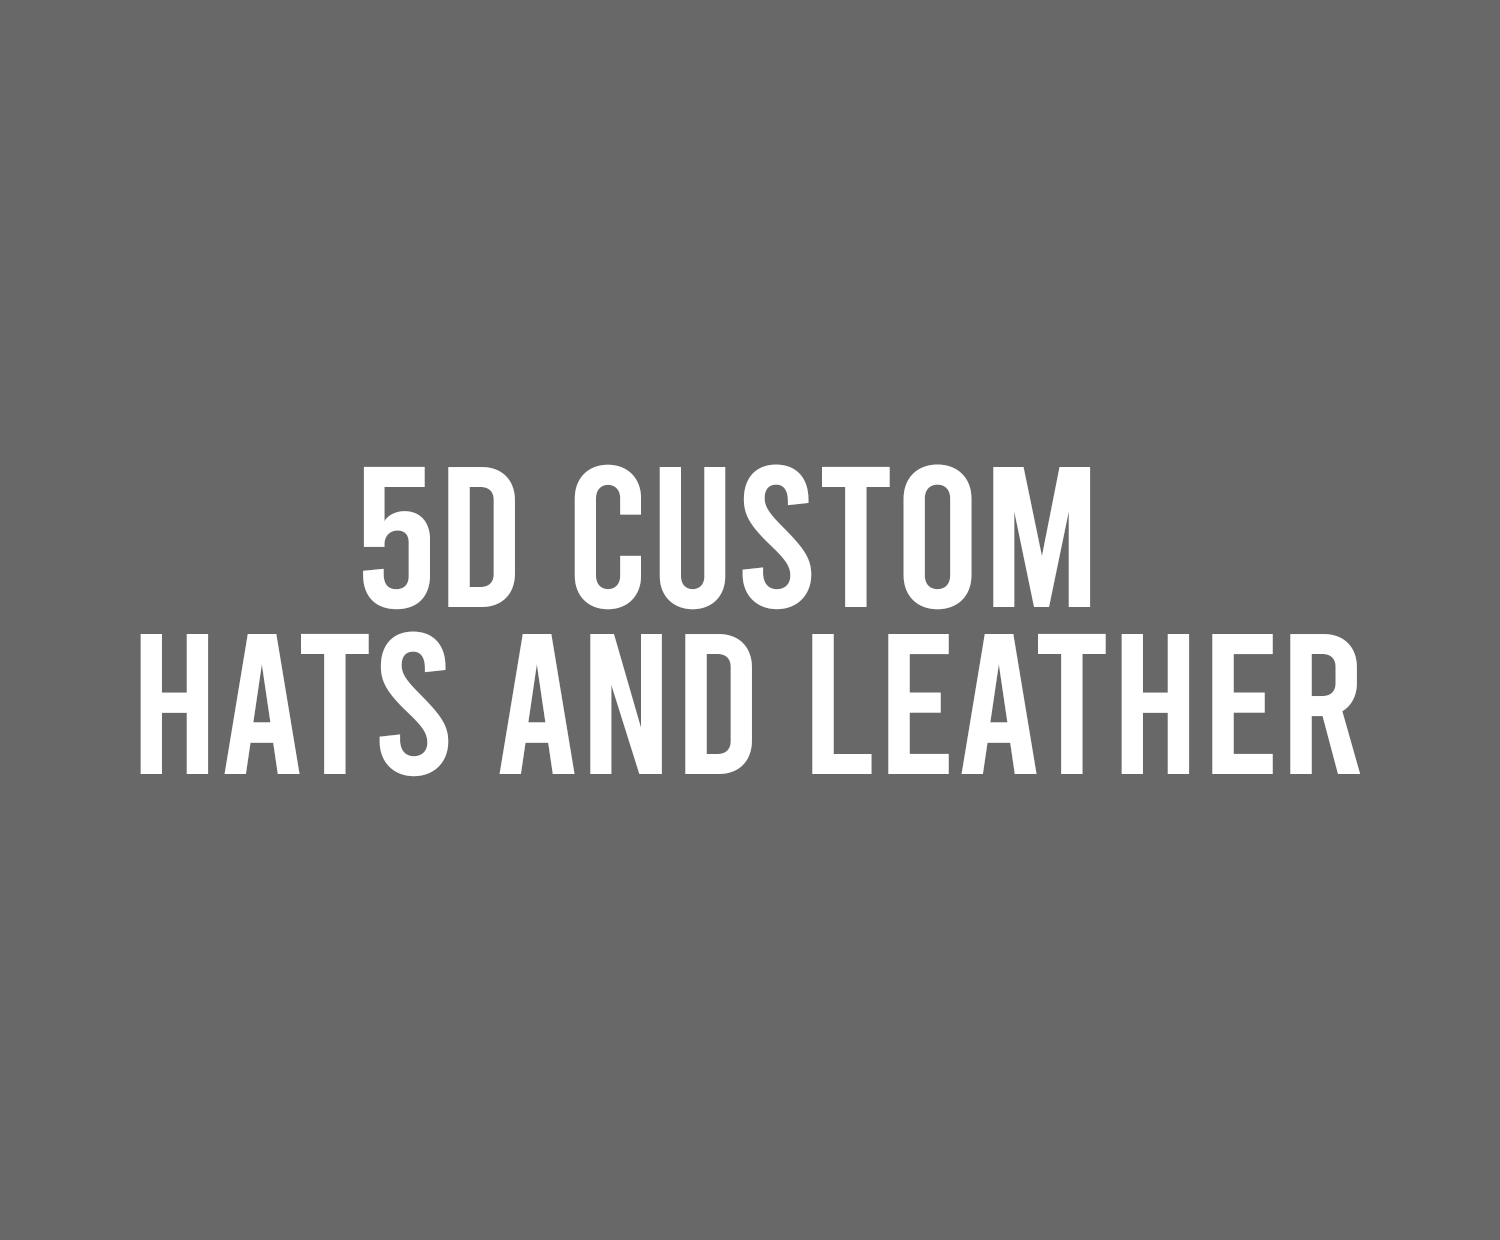 5D Custom Hats and Leather